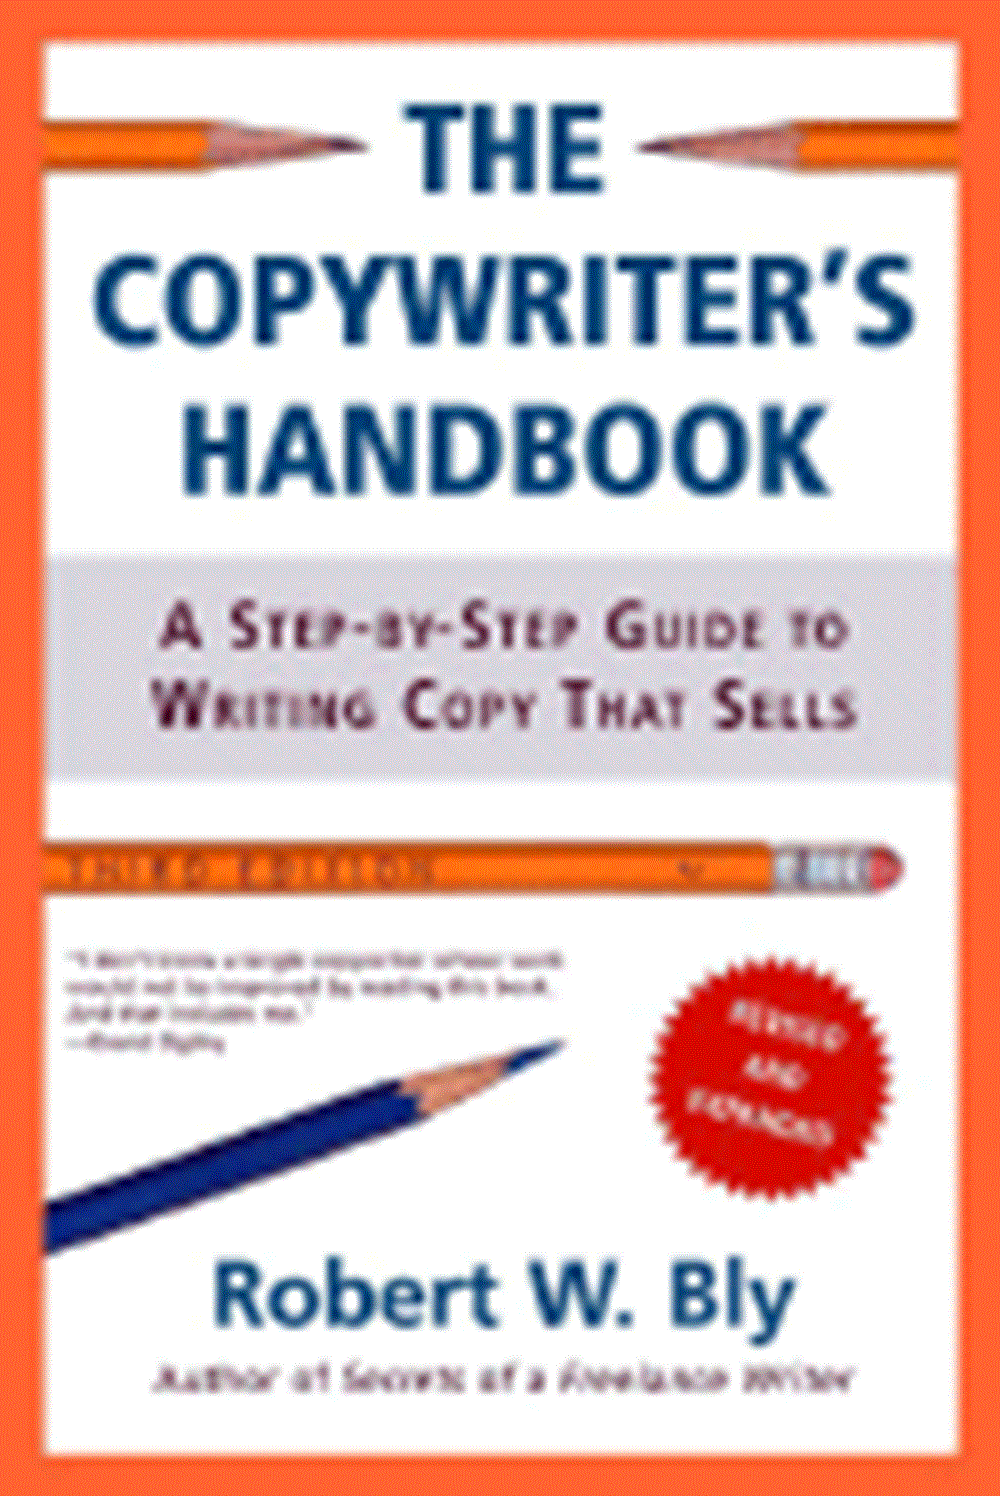 Copywriter's Handbook: A Step-By-Step Guide to Writing Copy That Sells, 3rd Edition (Third Edition, 